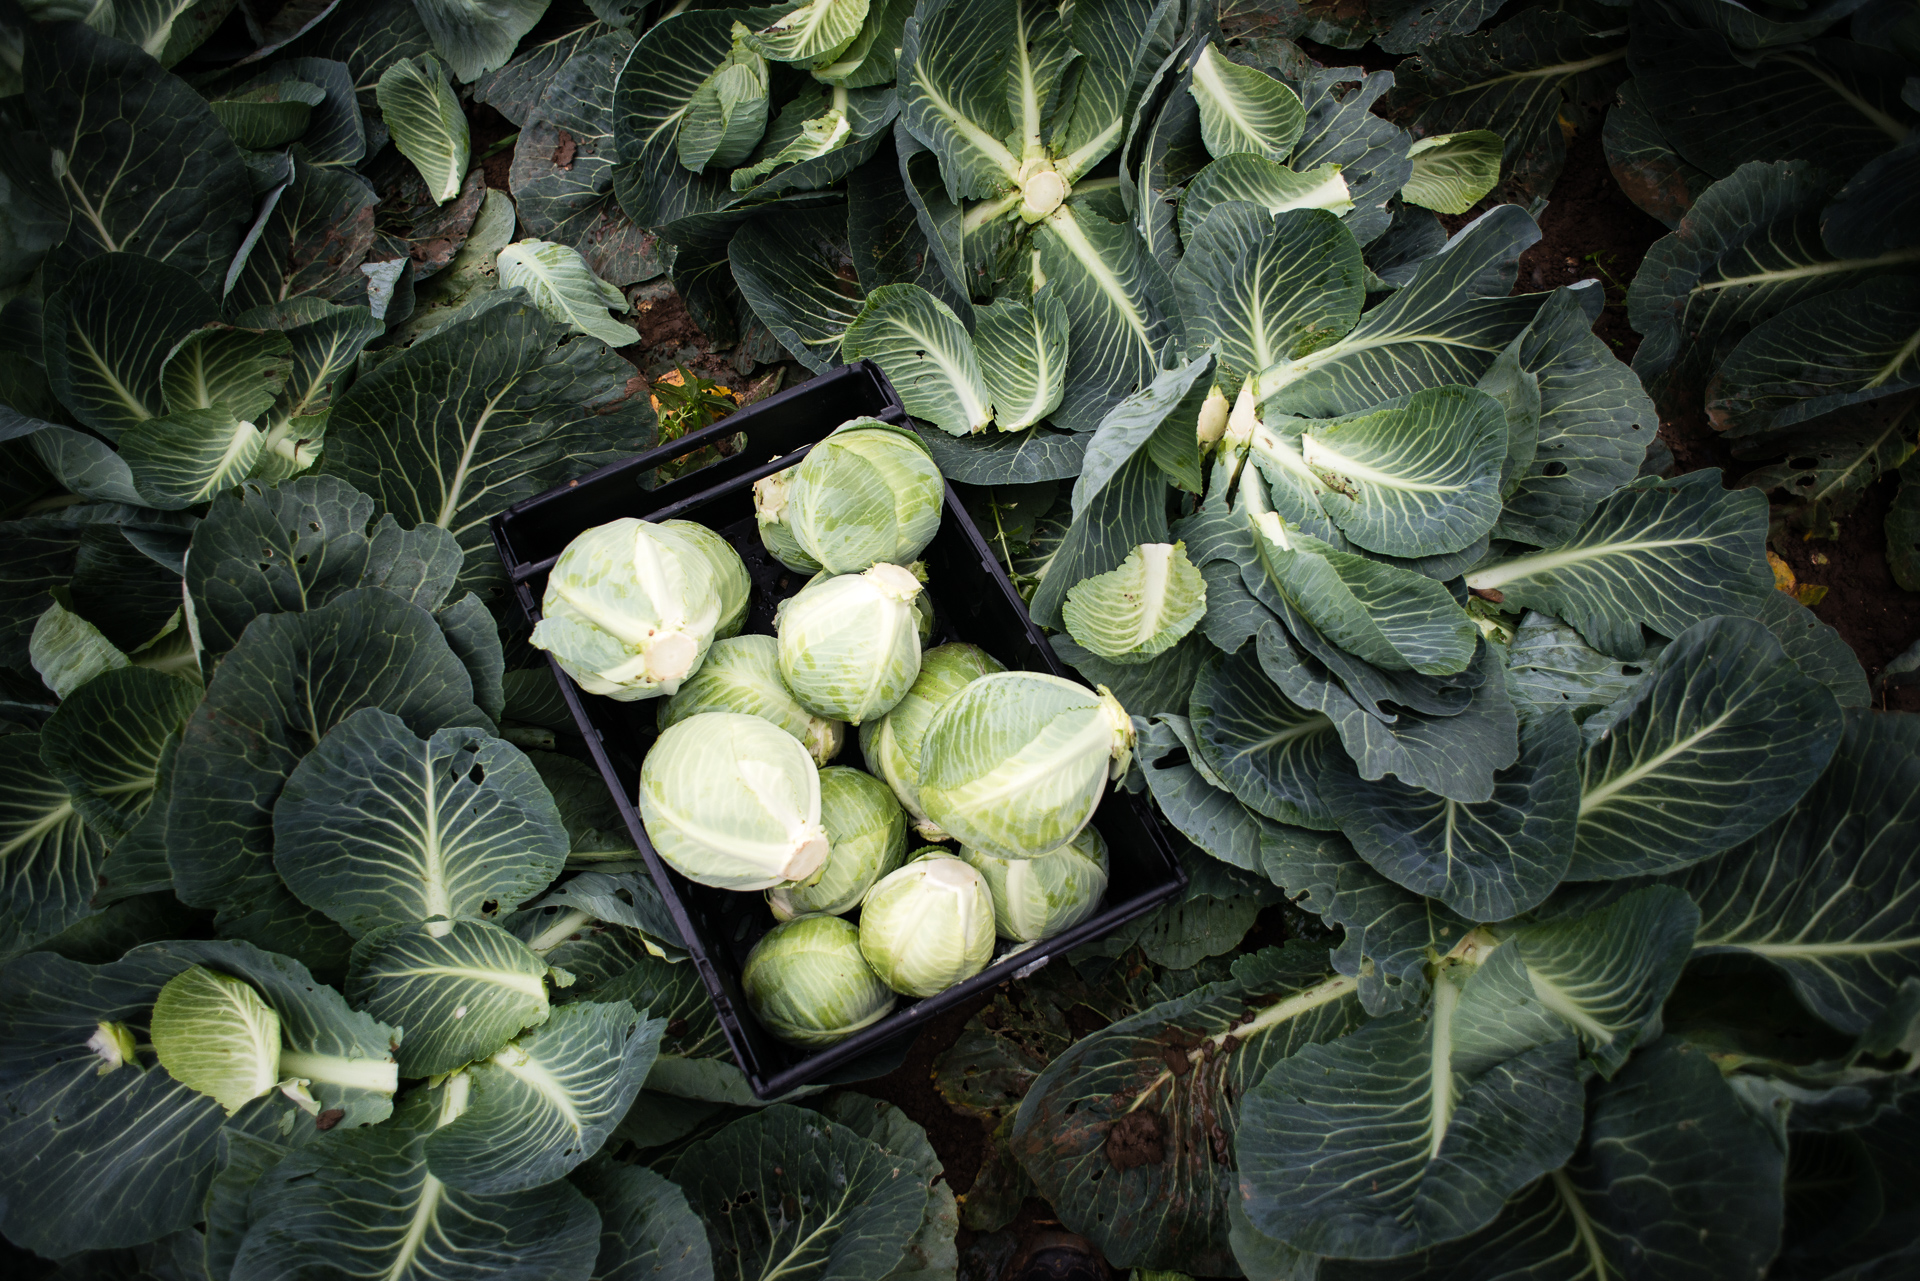 Gleaning for Cabbages - Food Waste on UK Farms Photographed by Chris King